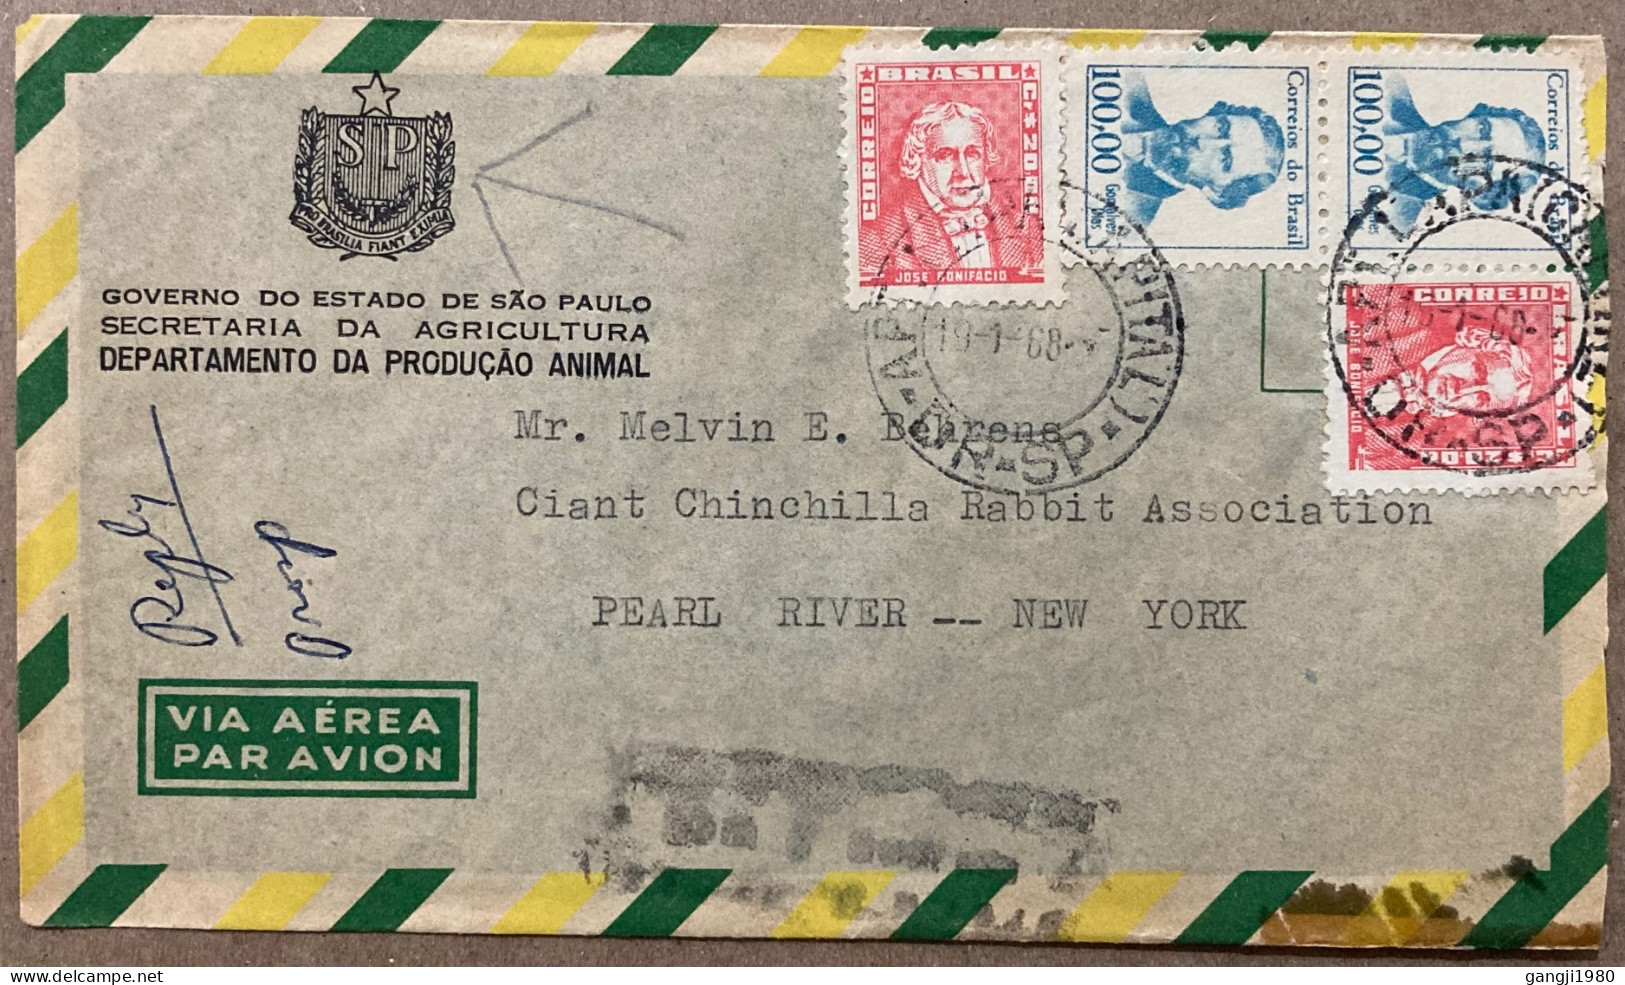 BRAZIL1968, COVER USED TO USA, ADVERTISING COVER, AGRICULTURE MINISTRY, ANIMAL & RABBIT BREEDER, IMPORT- EXPORT, ENCLOSE - Covers & Documents